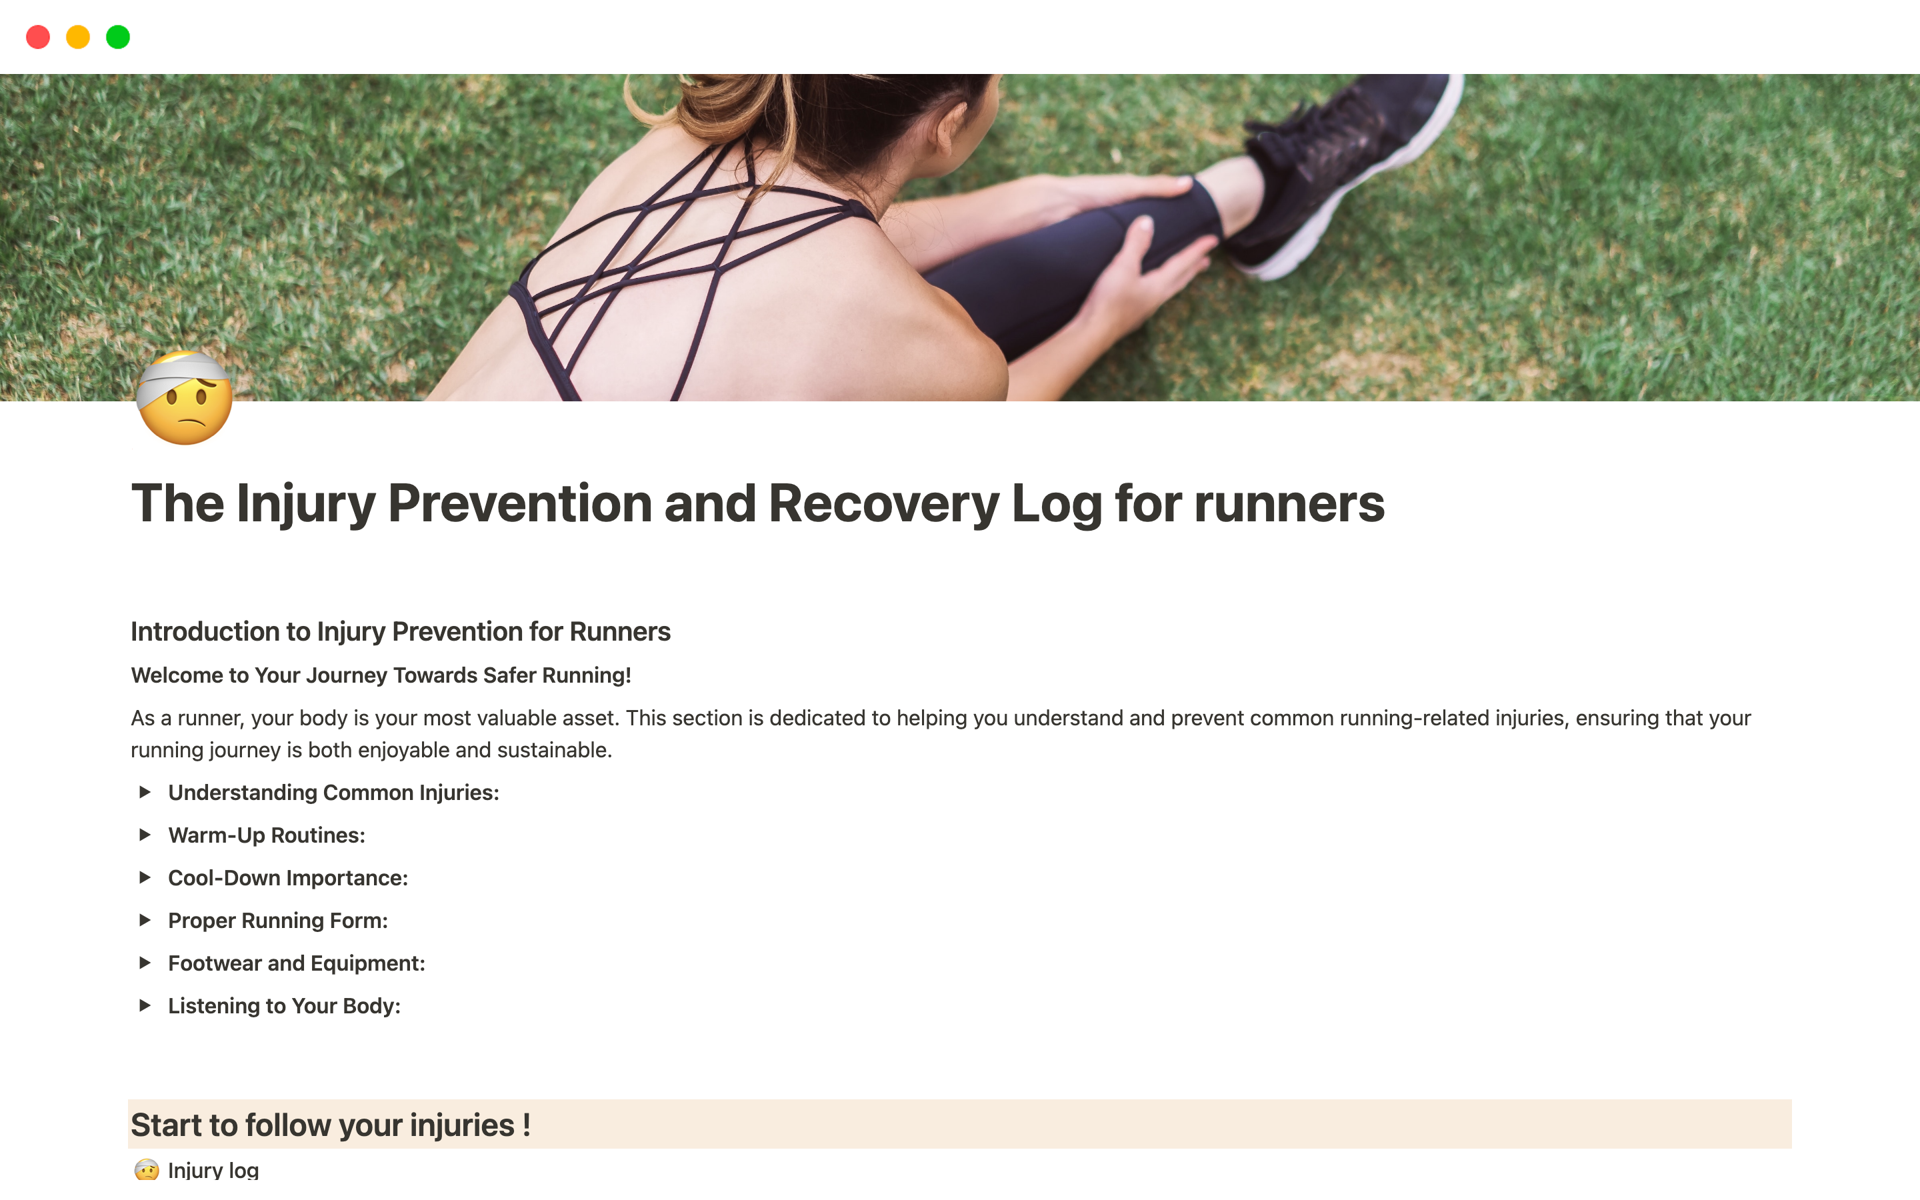 Vista previa de una plantilla para The Injury Prevention and Recovery Log for runners